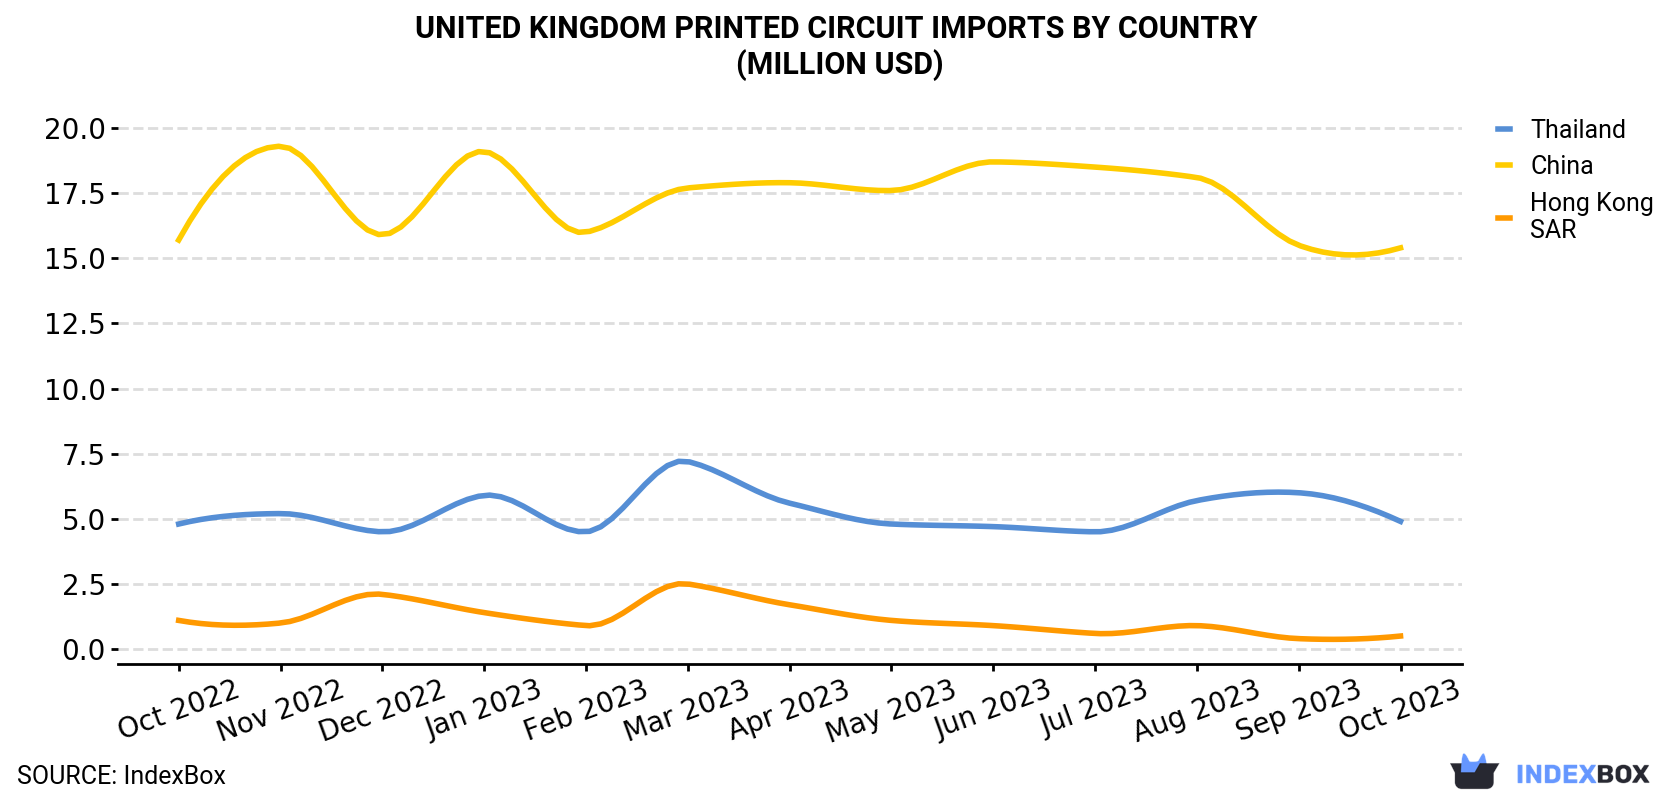 United Kingdom Printed Circuit Imports By Country (Million USD)